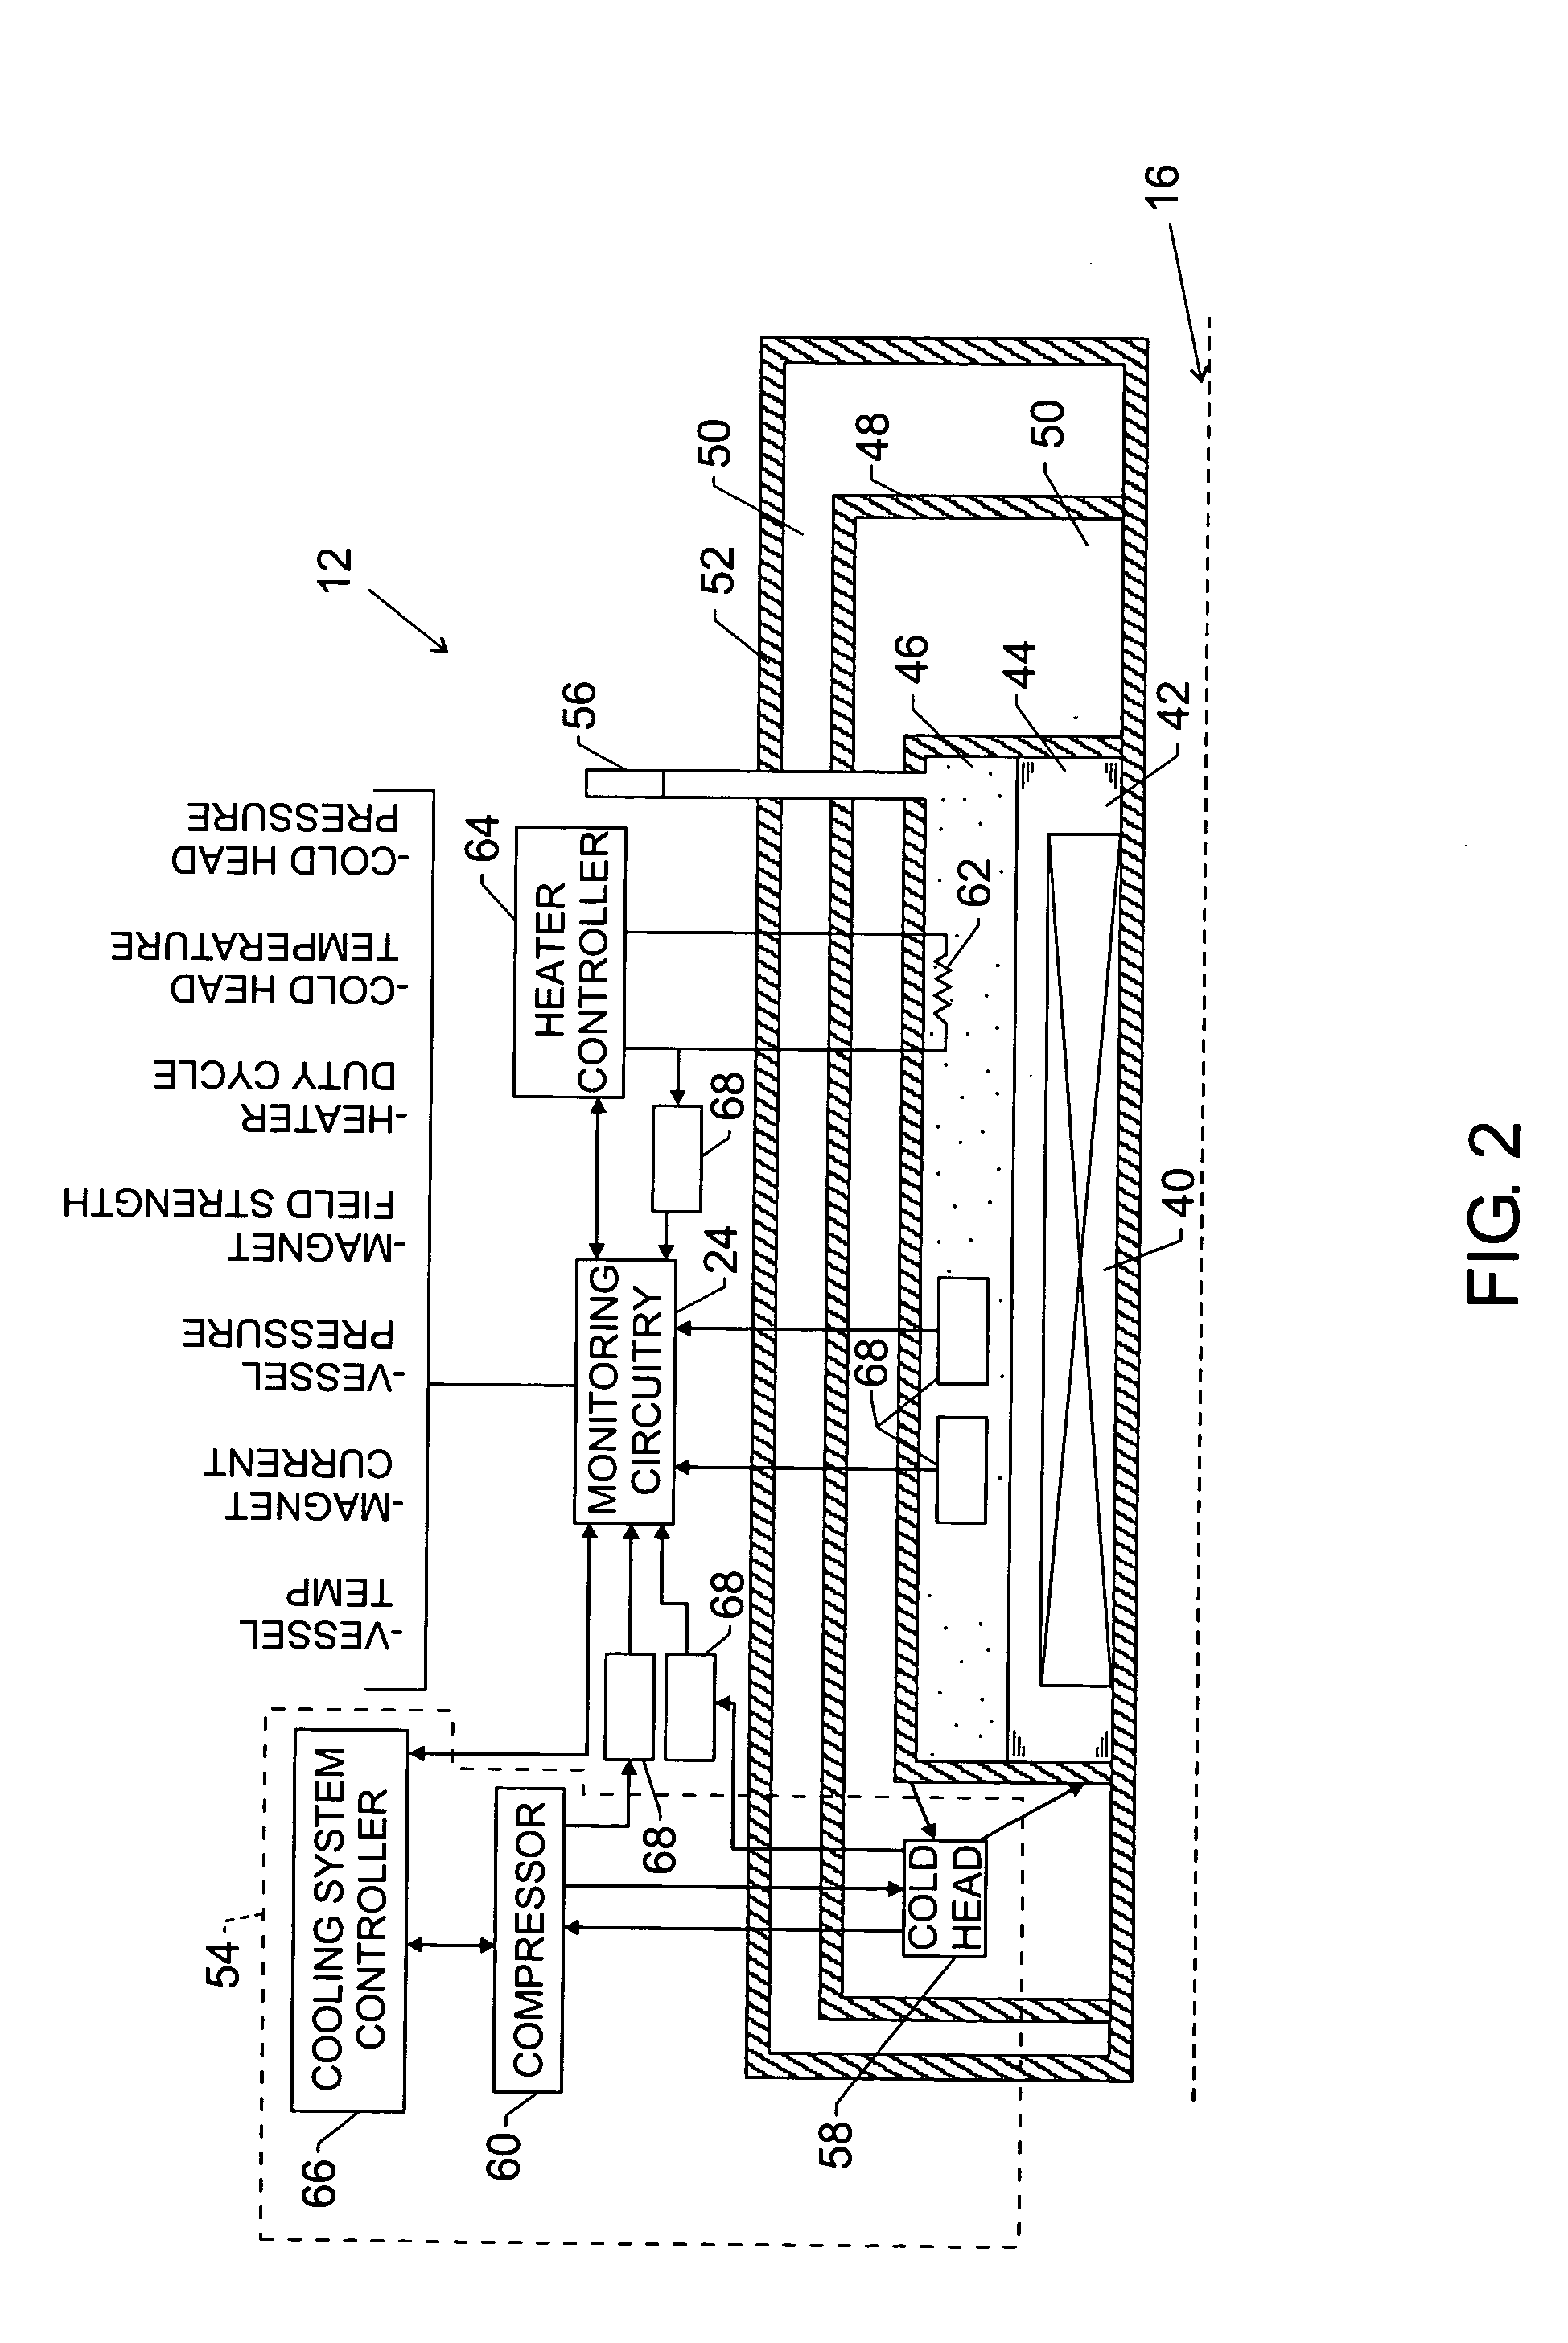 Automated superconducting magnet ramp-up system and method